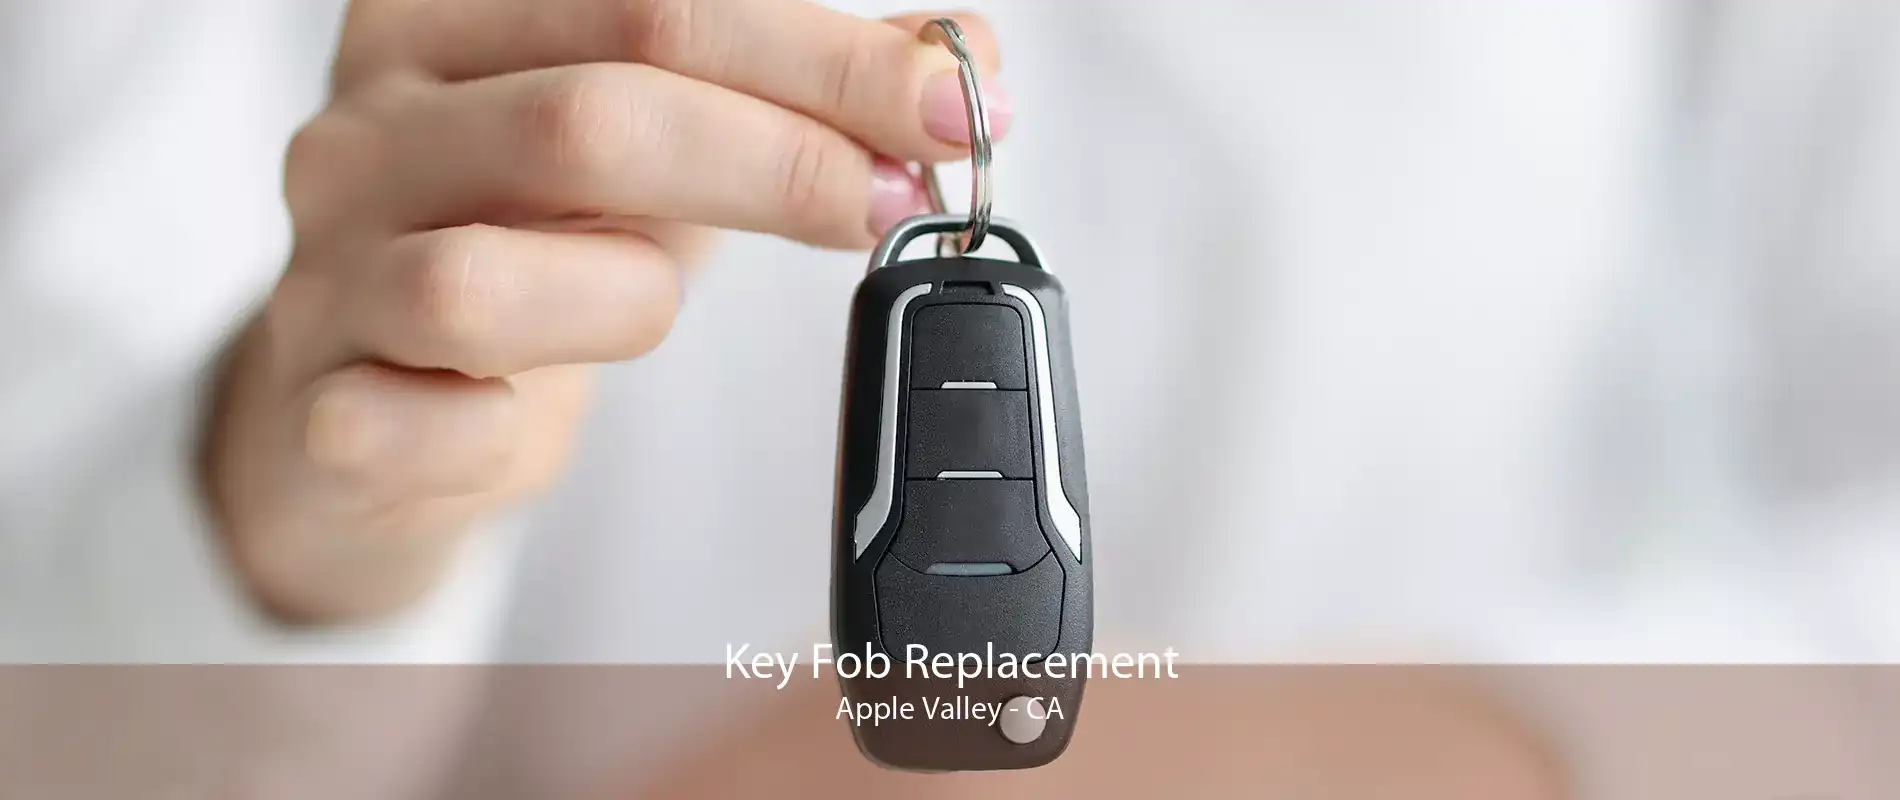 Key Fob Replacement Apple Valley - CA